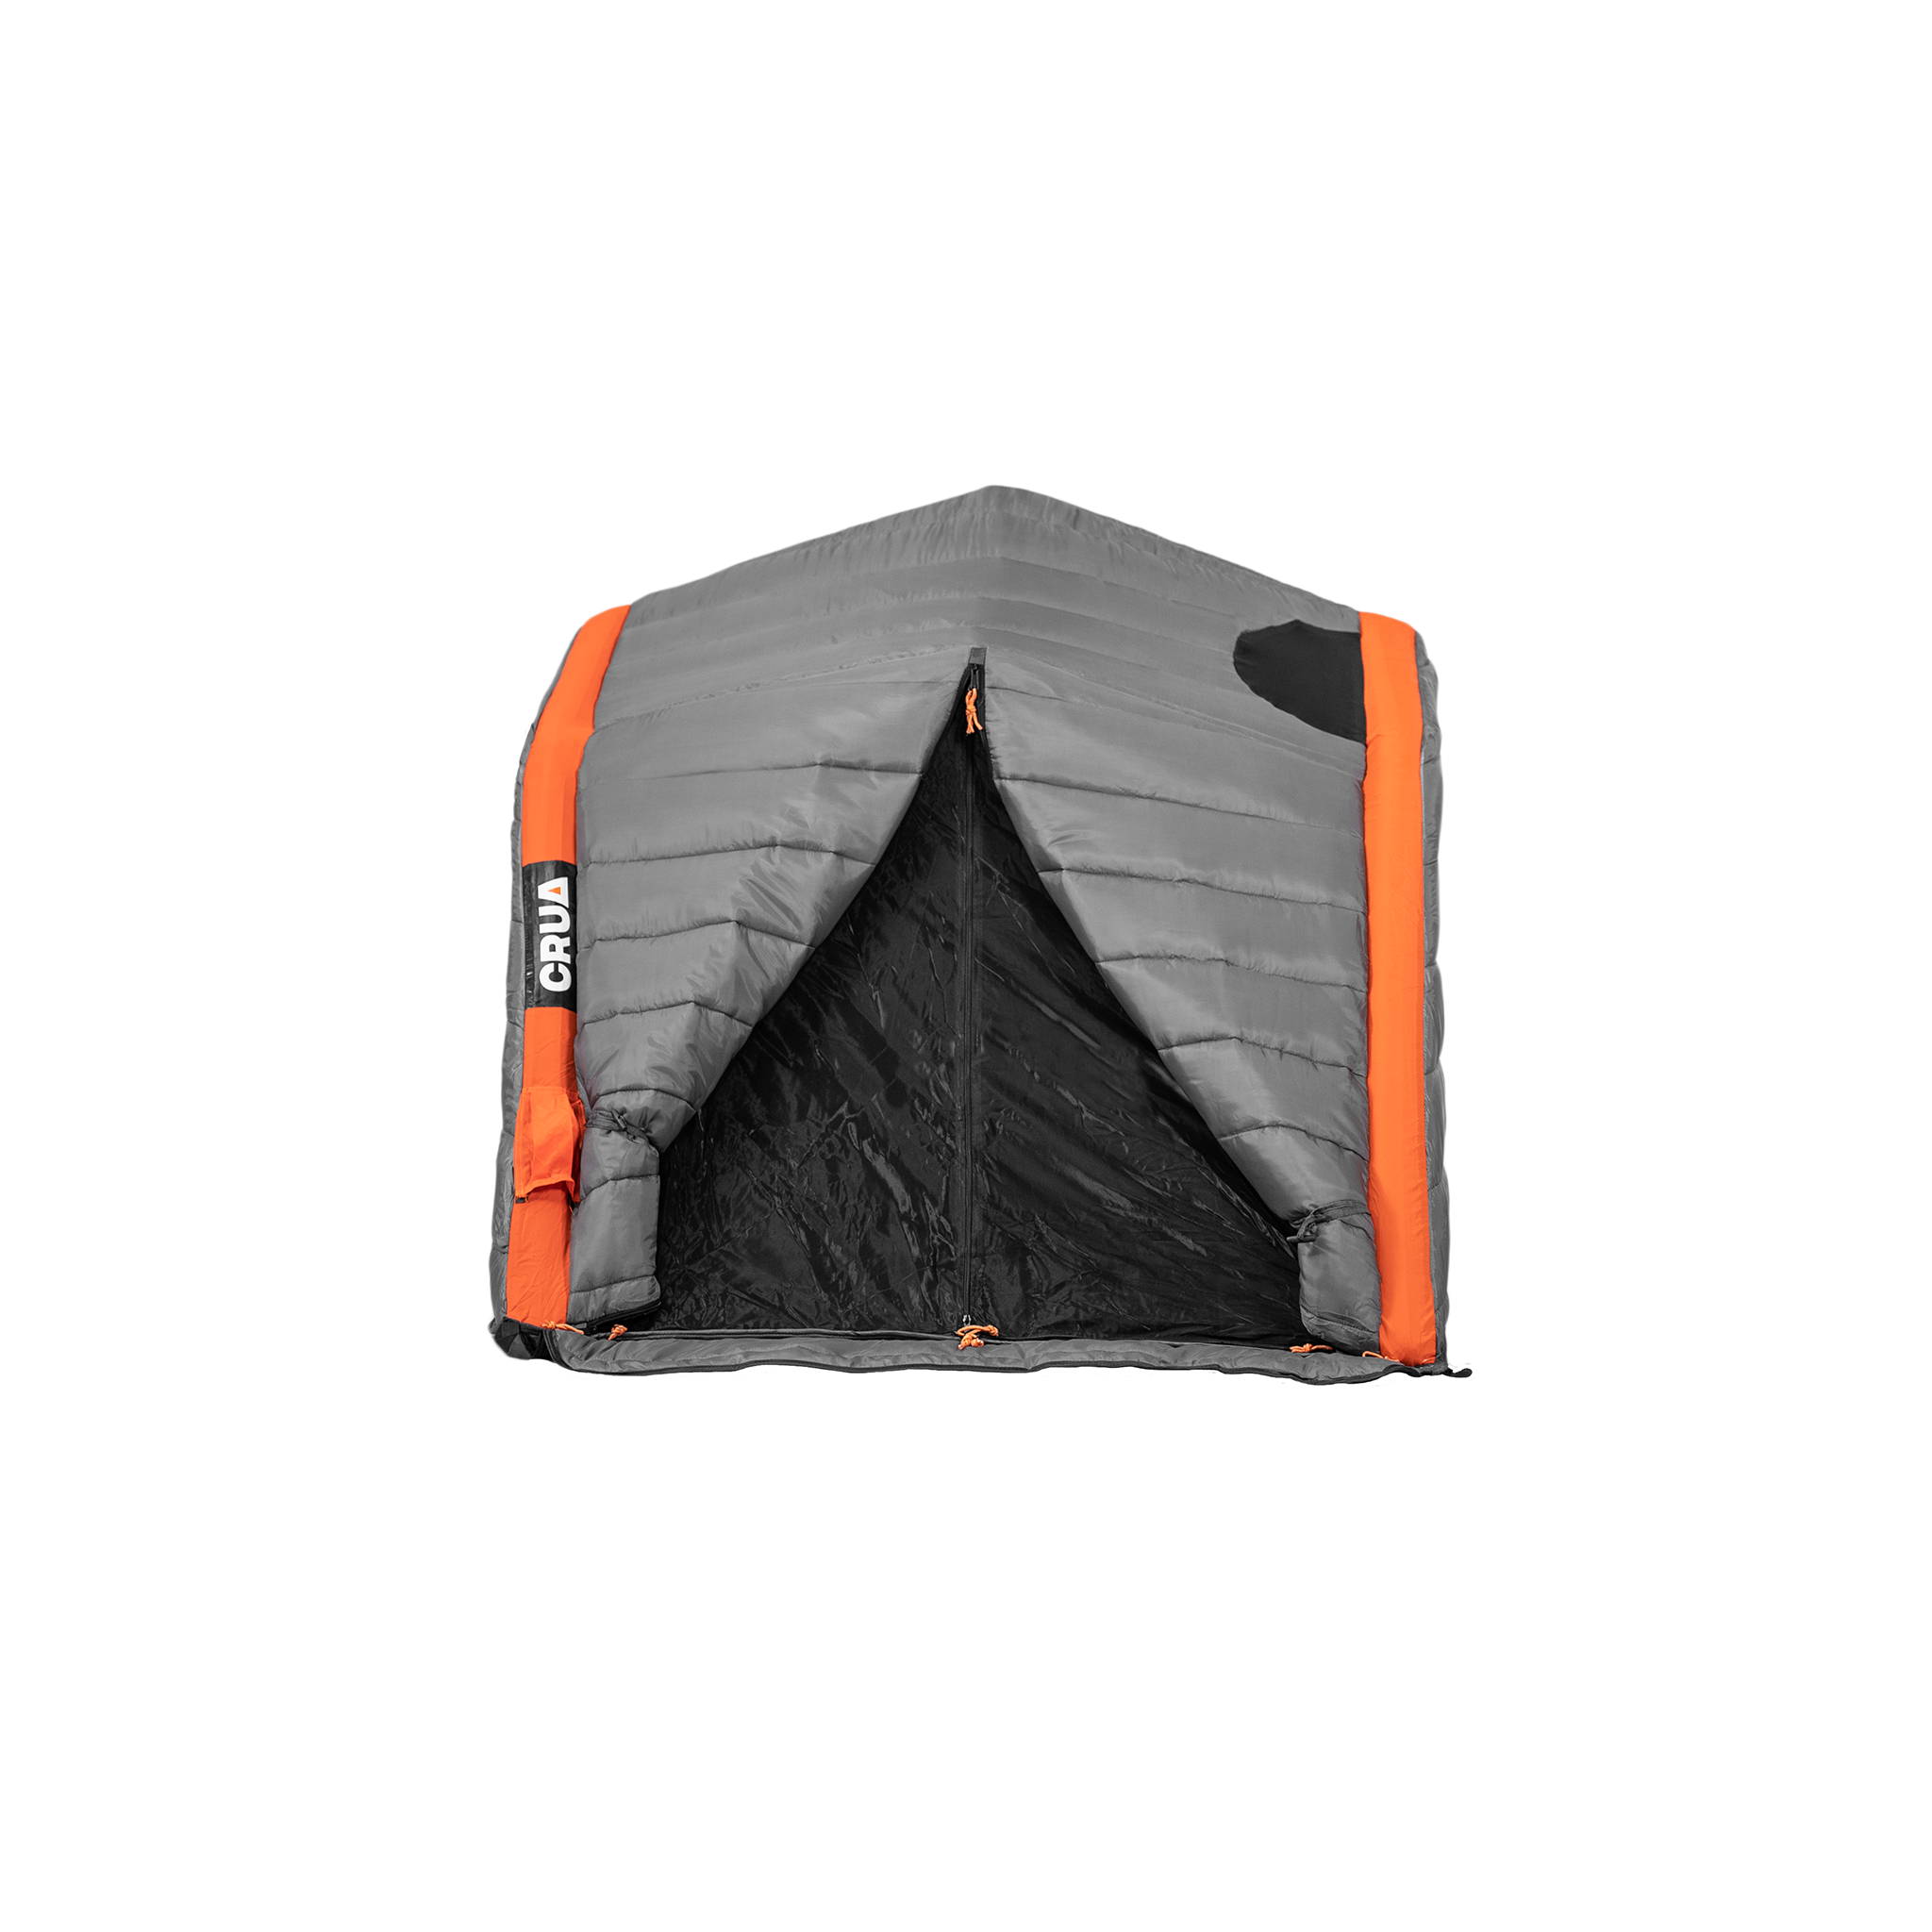 Culla Haul Maxx | 3 Person Insulated Inner Tent With Temperature Regulating, Noise Dampening And Light Blocking Features